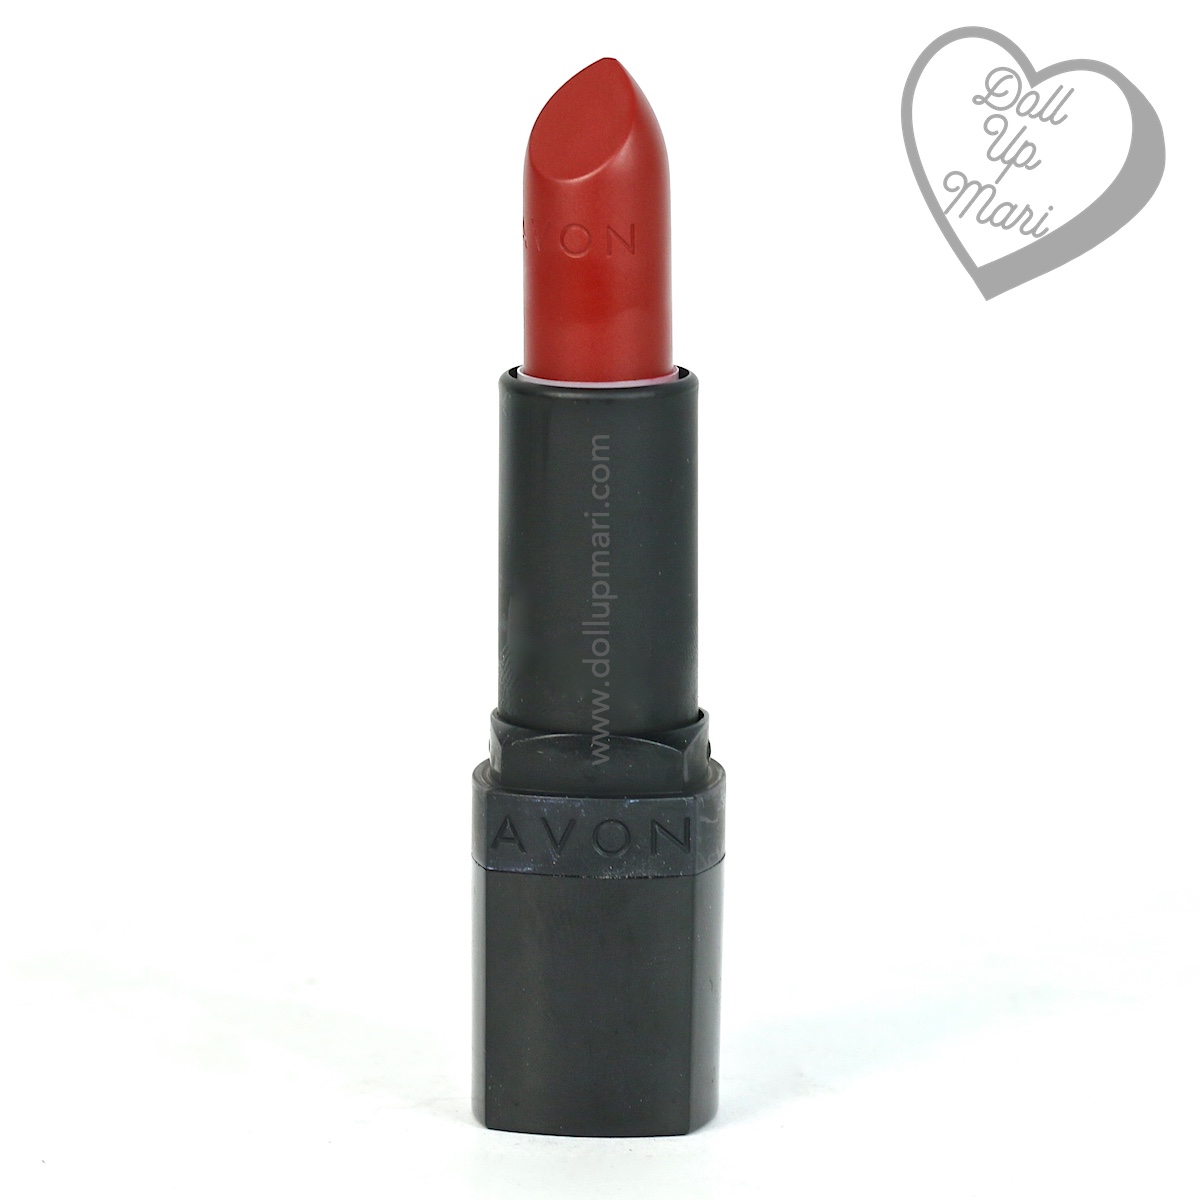 Pack shot of Red Supreme shade of AVON Perfectly Matte Lipstick